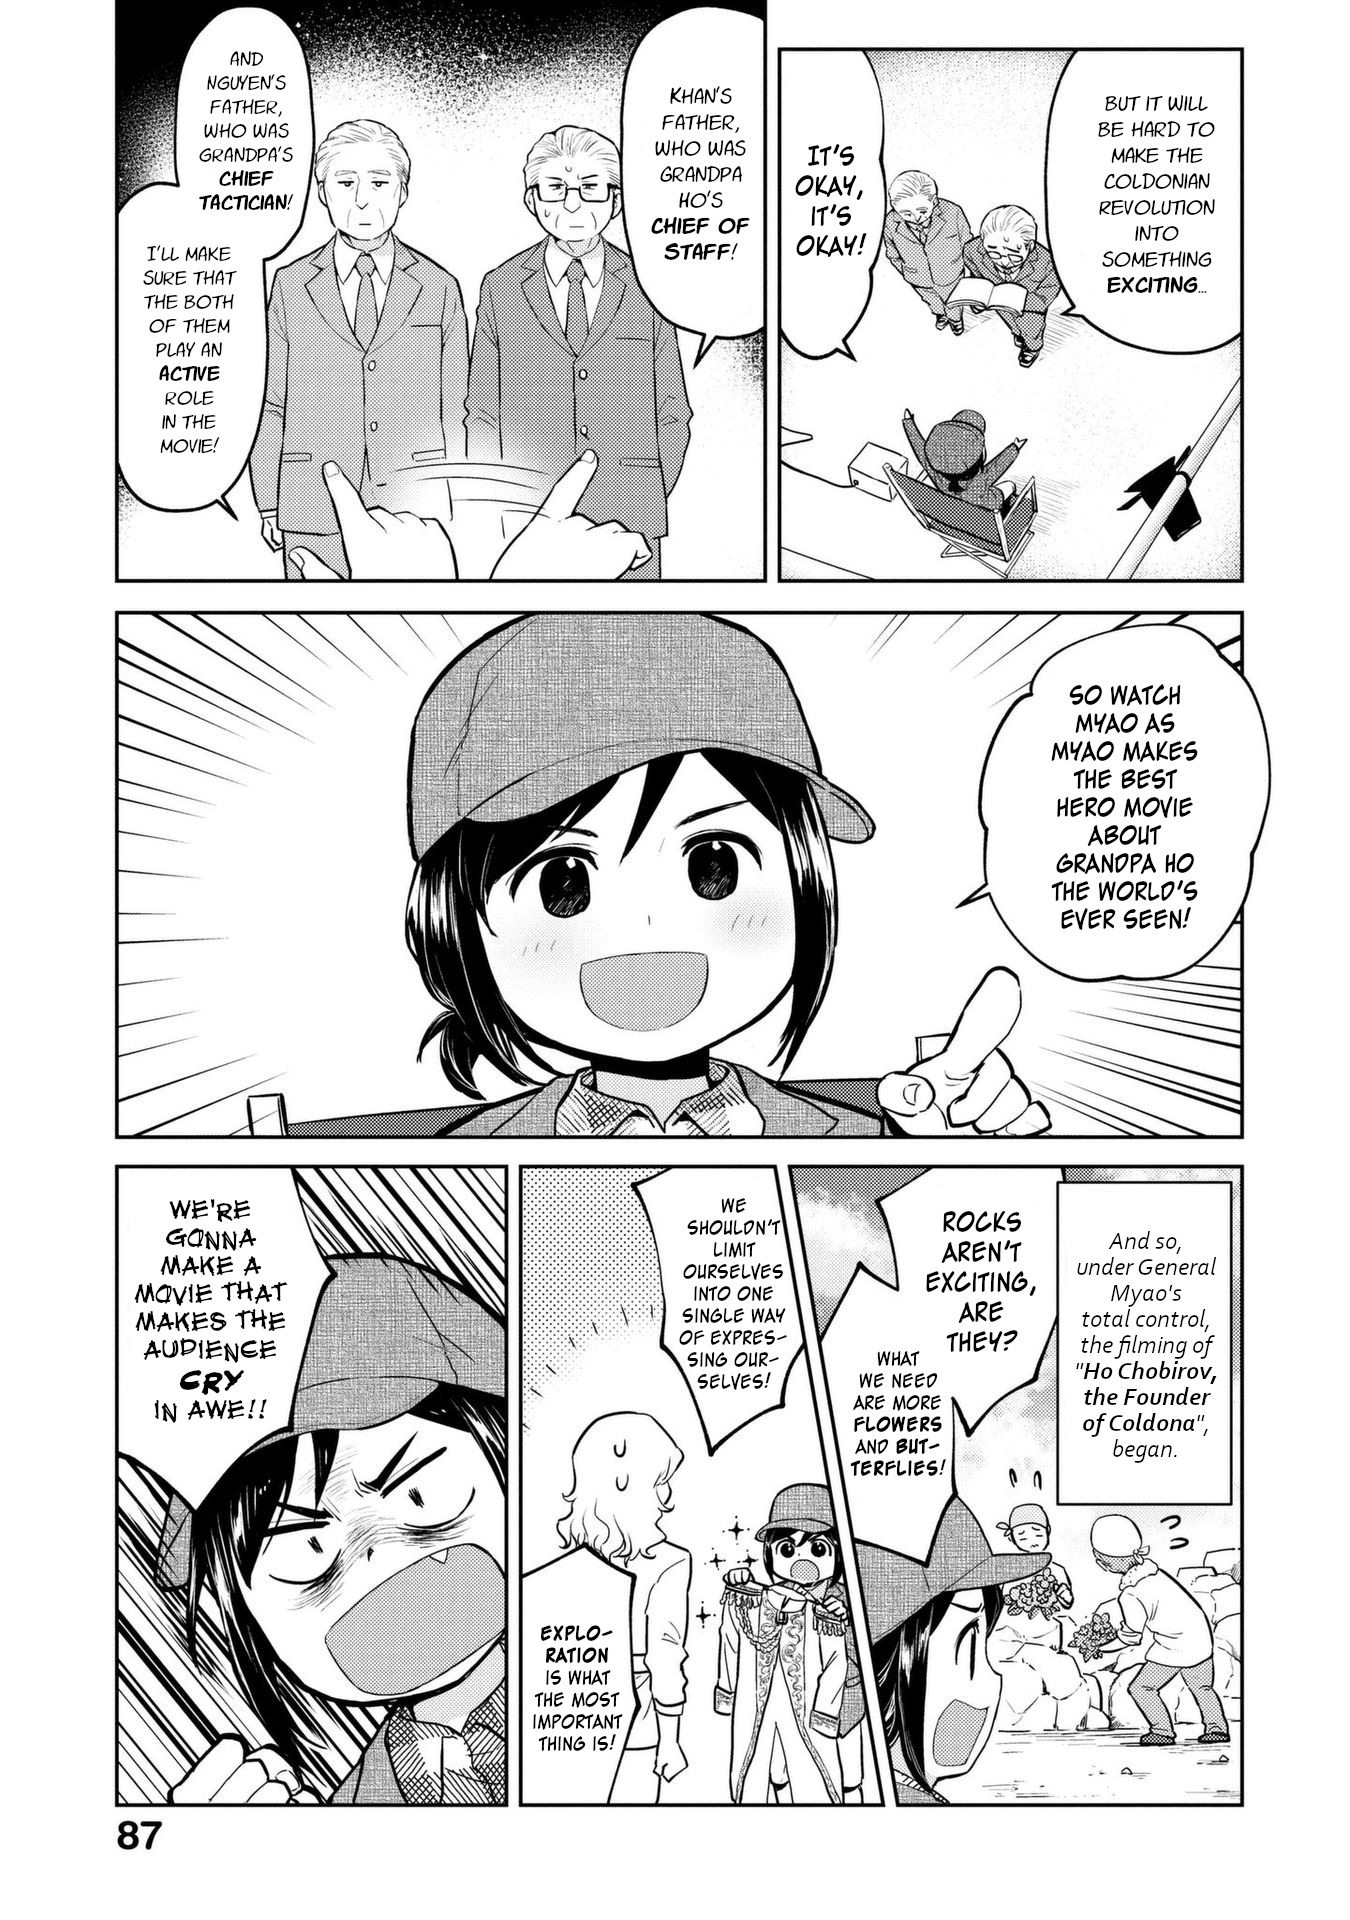 Oh, Our General Myao. vol.1 ch.9